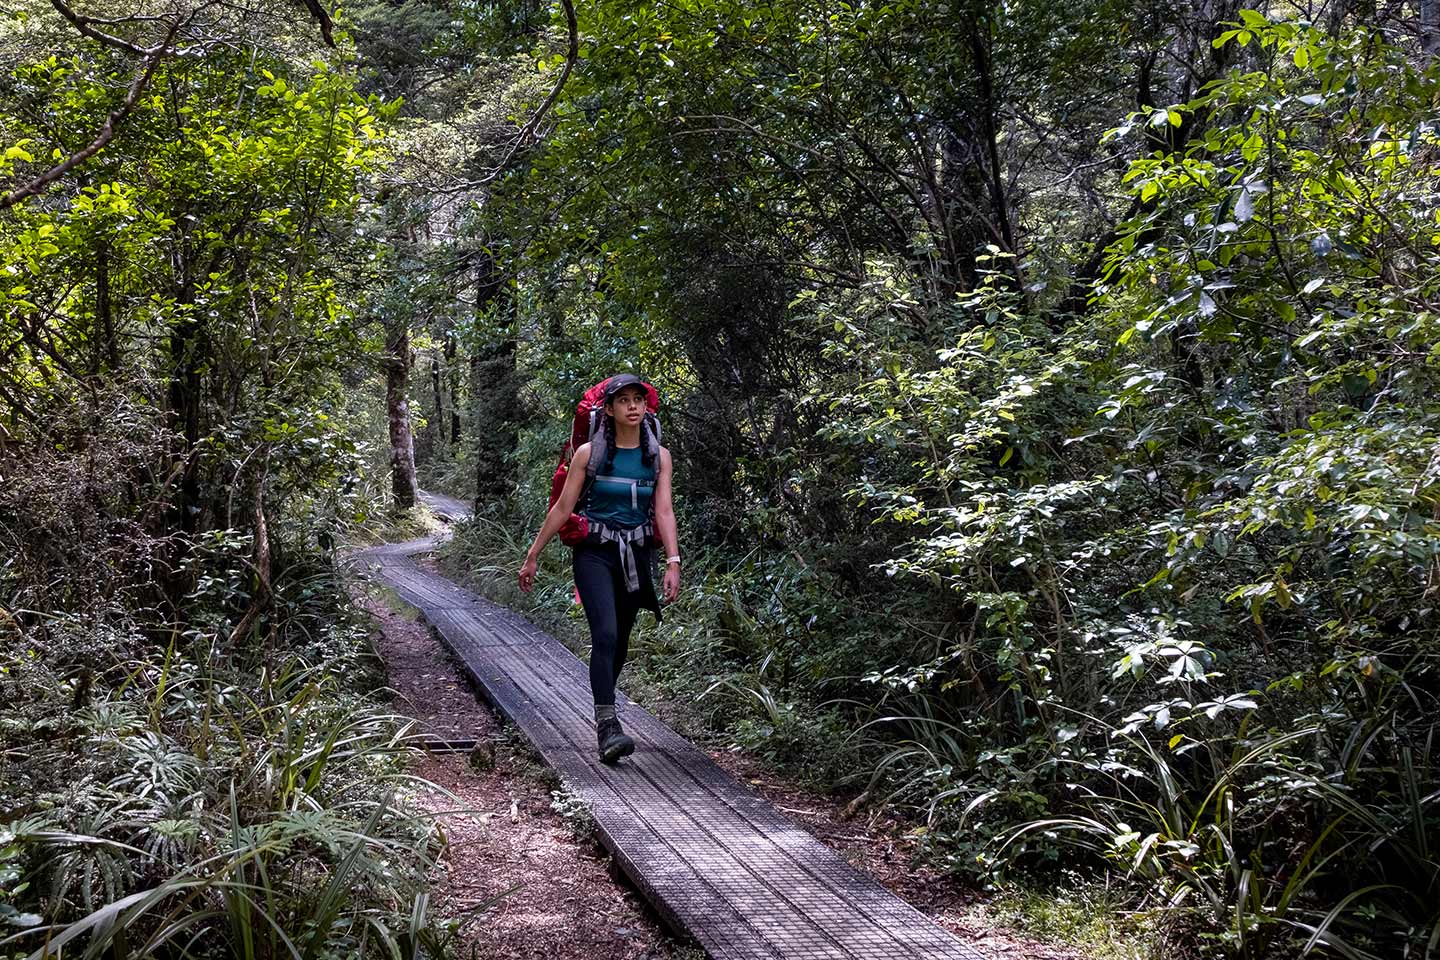 A women walking along a wooden path with a red hiking pack on her back. She is surrounded by lots of lush green forest.